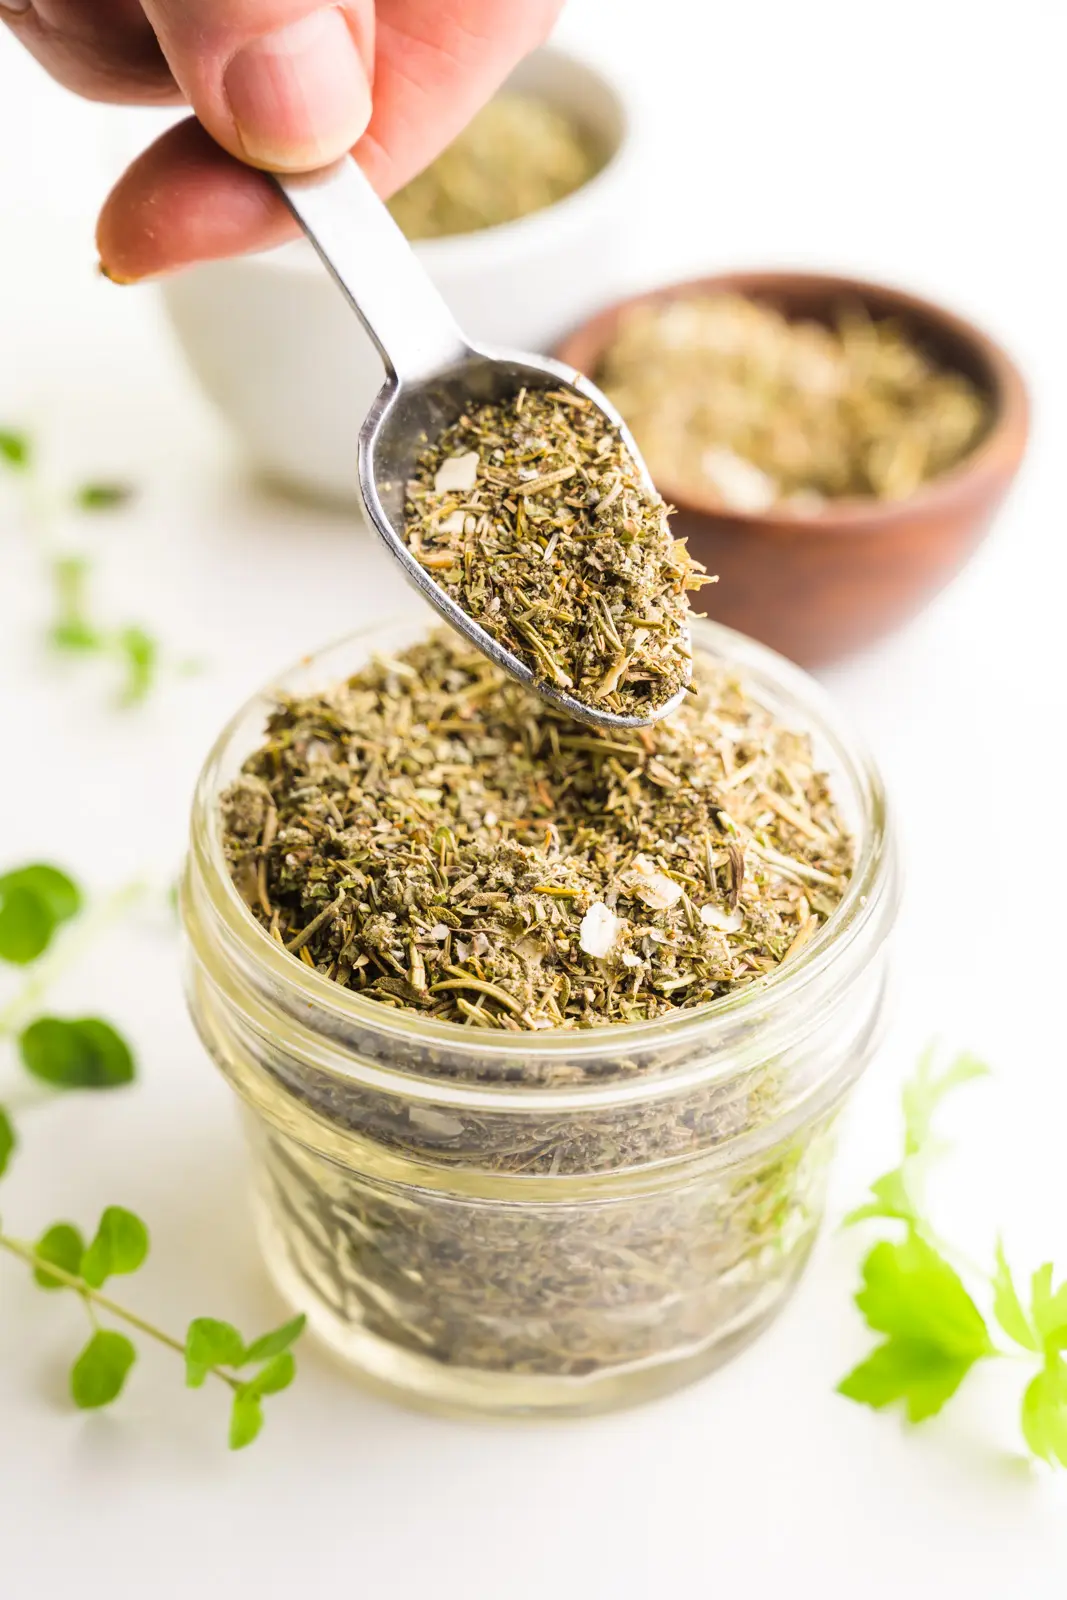 A spoon holds seasoning over a bowl of more seasoning. There are fresh herbs and bowls with more seasoning behind it.